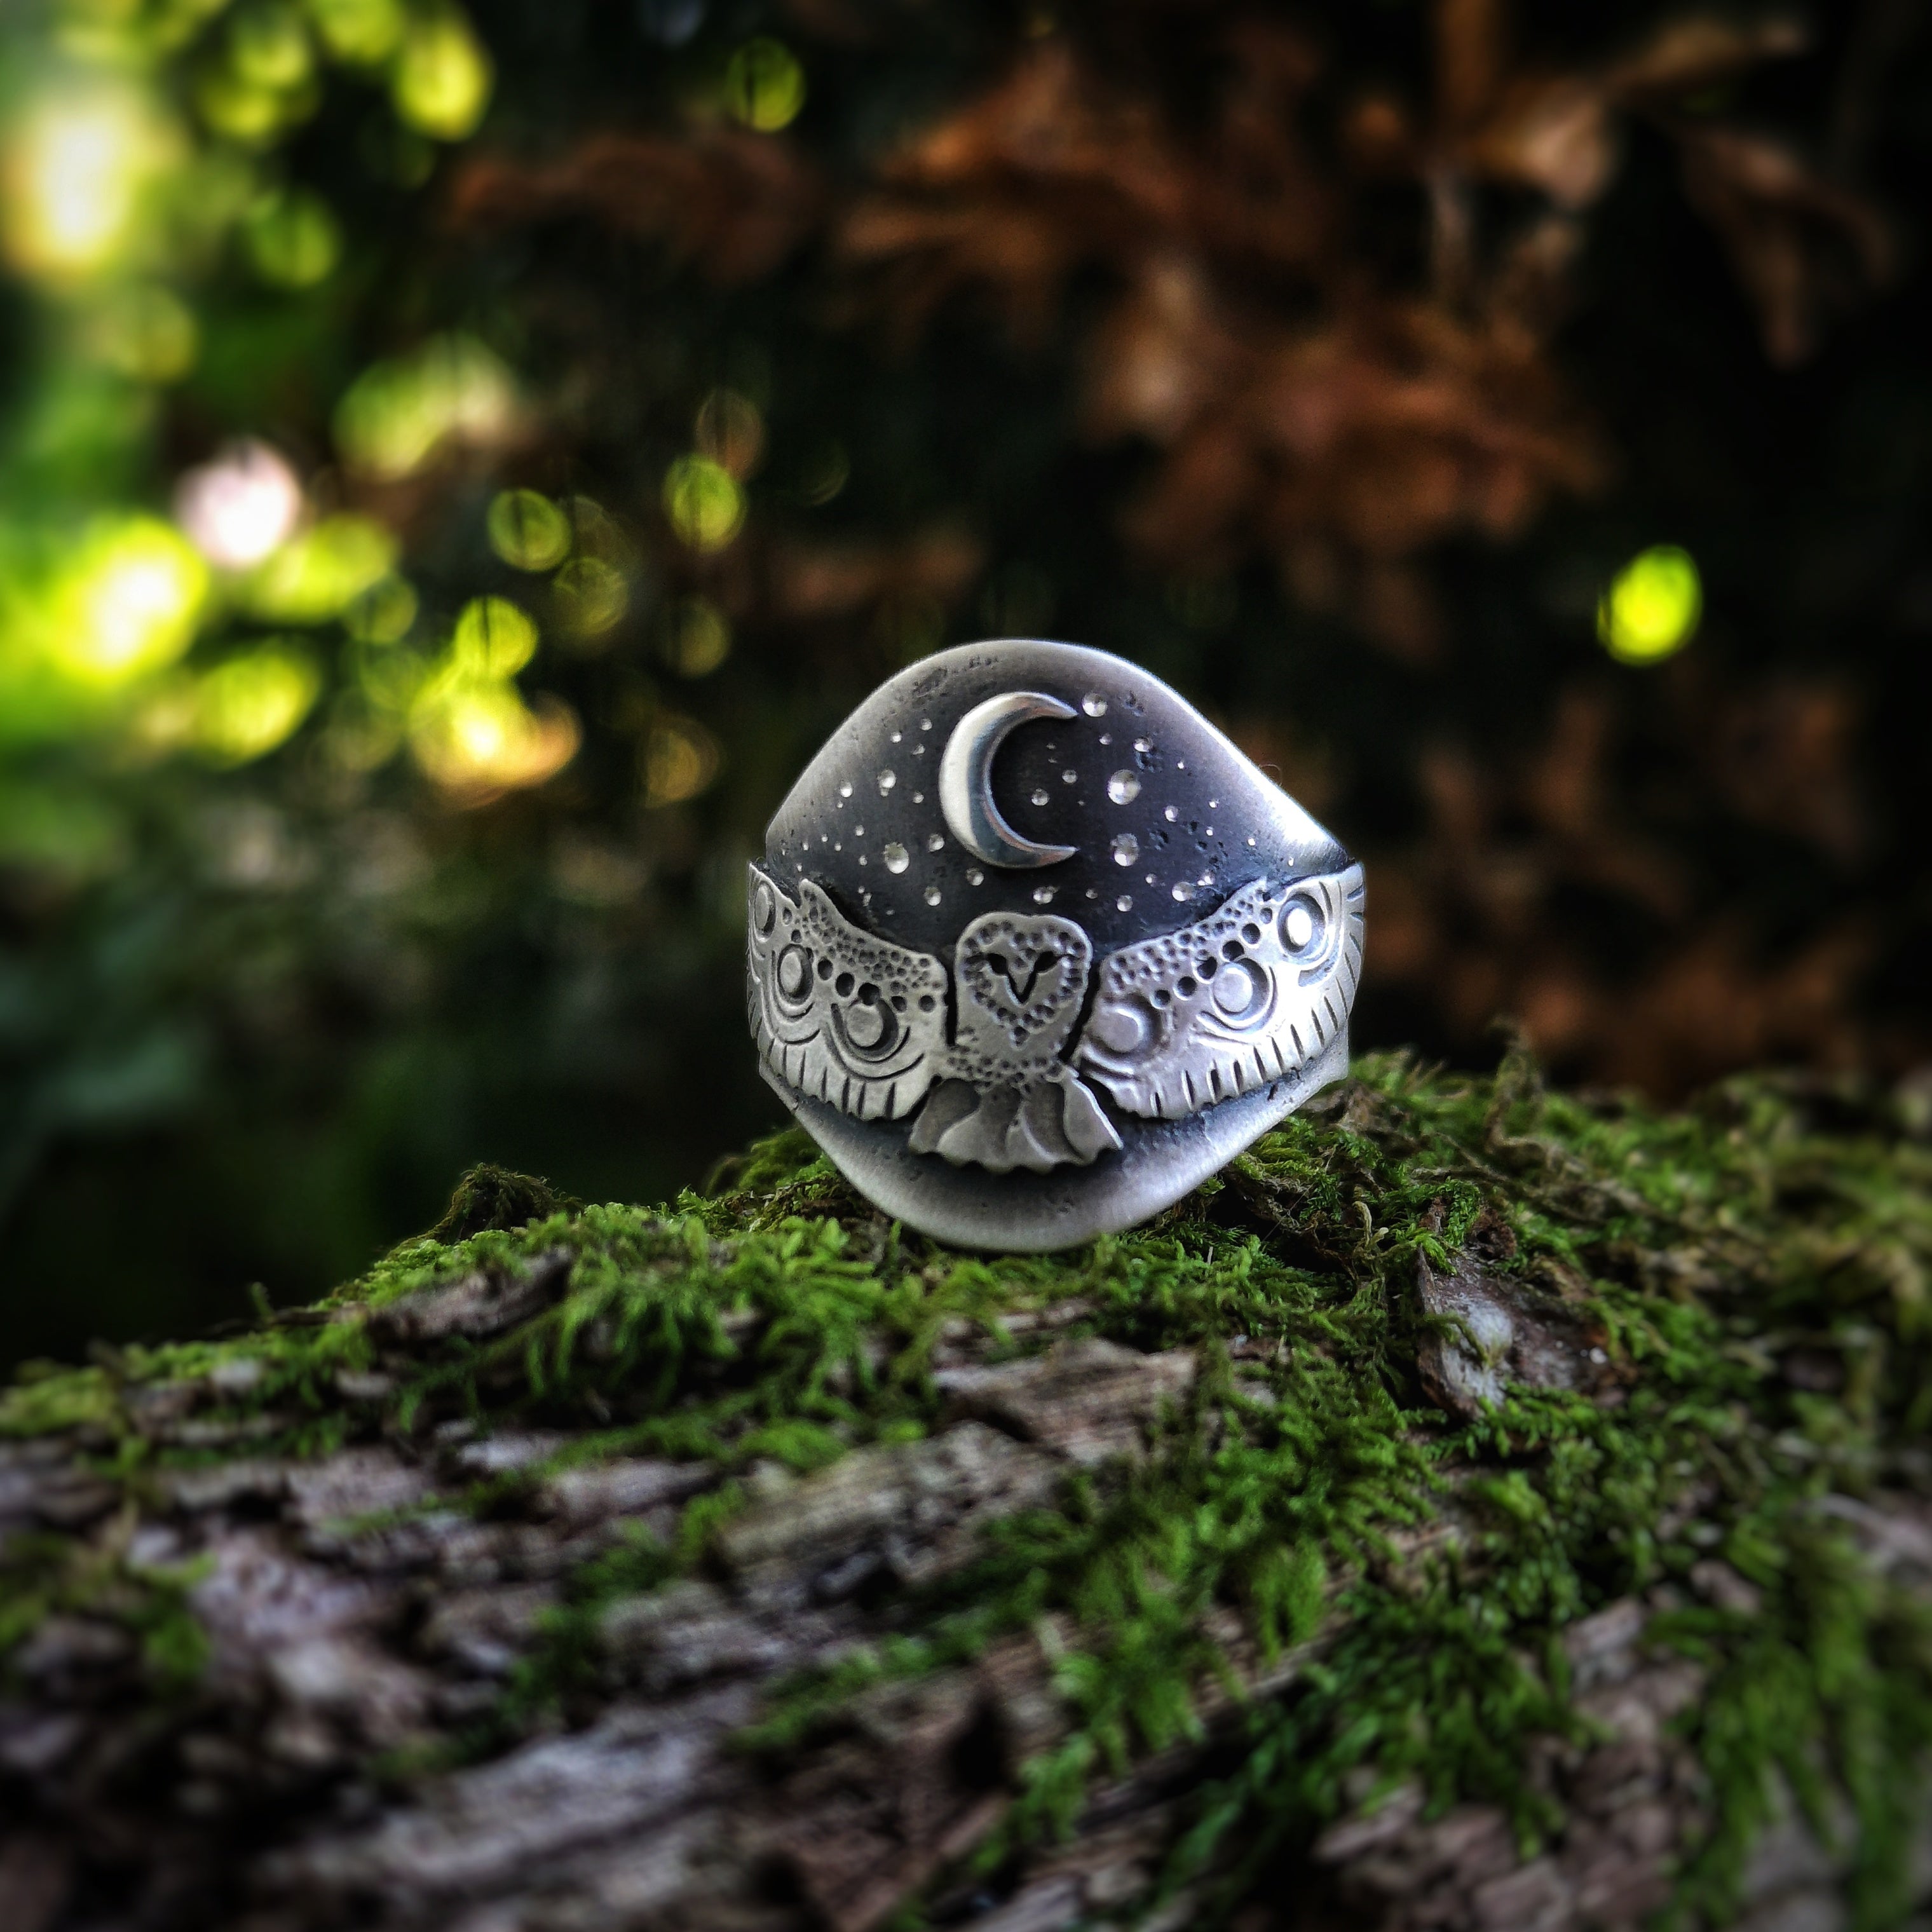 MADE TO ORDER The Barn Owl Ring - Totem Owl Ring